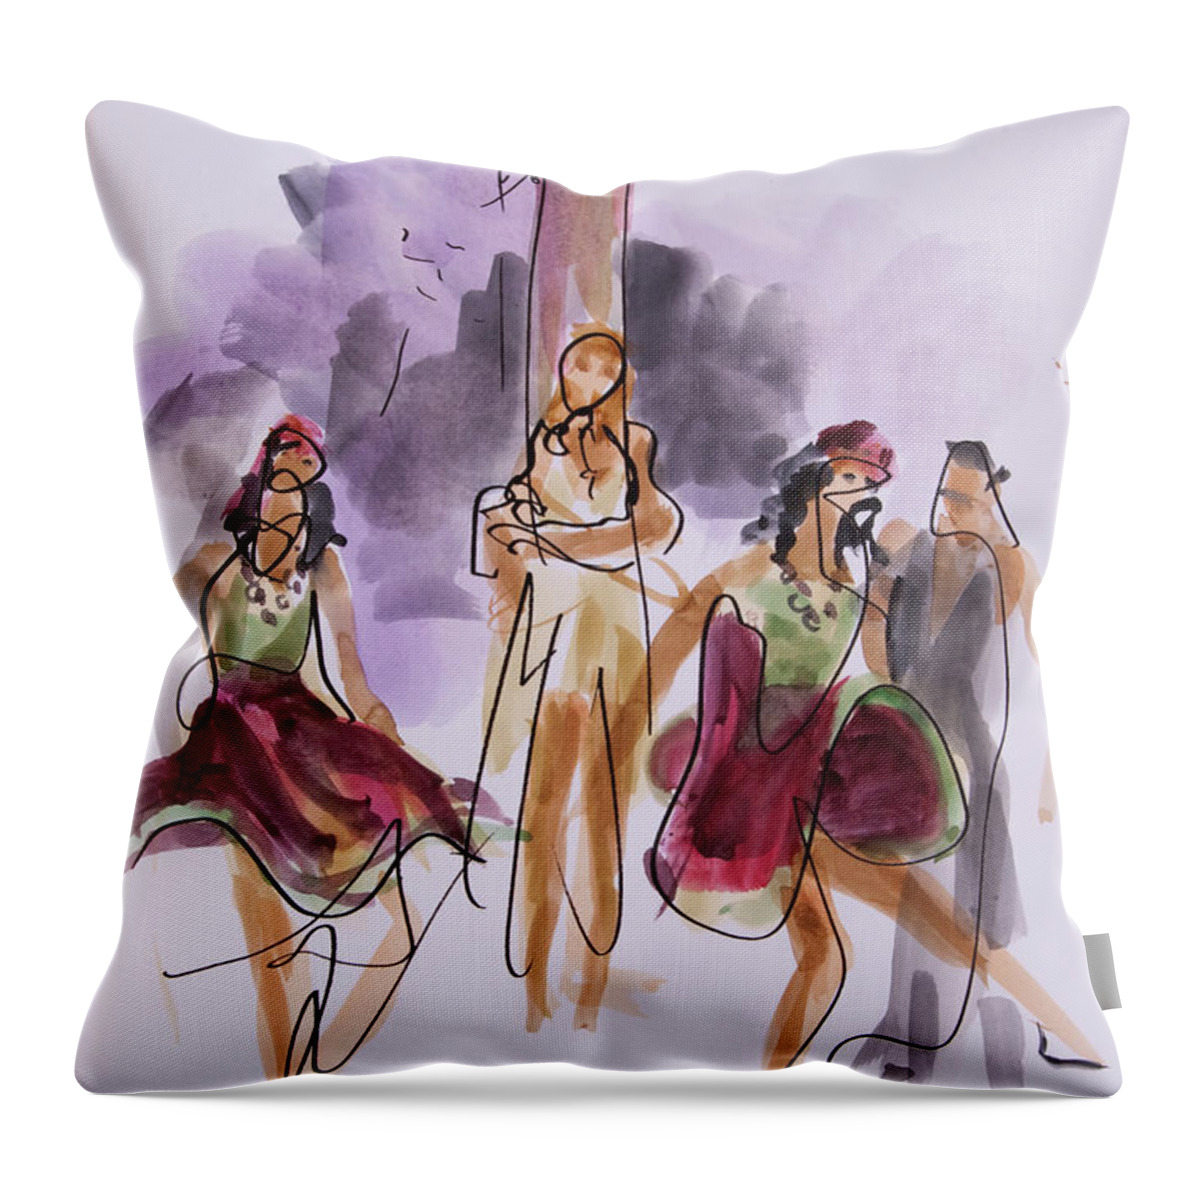 Shepherdesses Throw Pillow featuring the drawing Pirates assaults and binds Chloe by Peregrine Roskilly